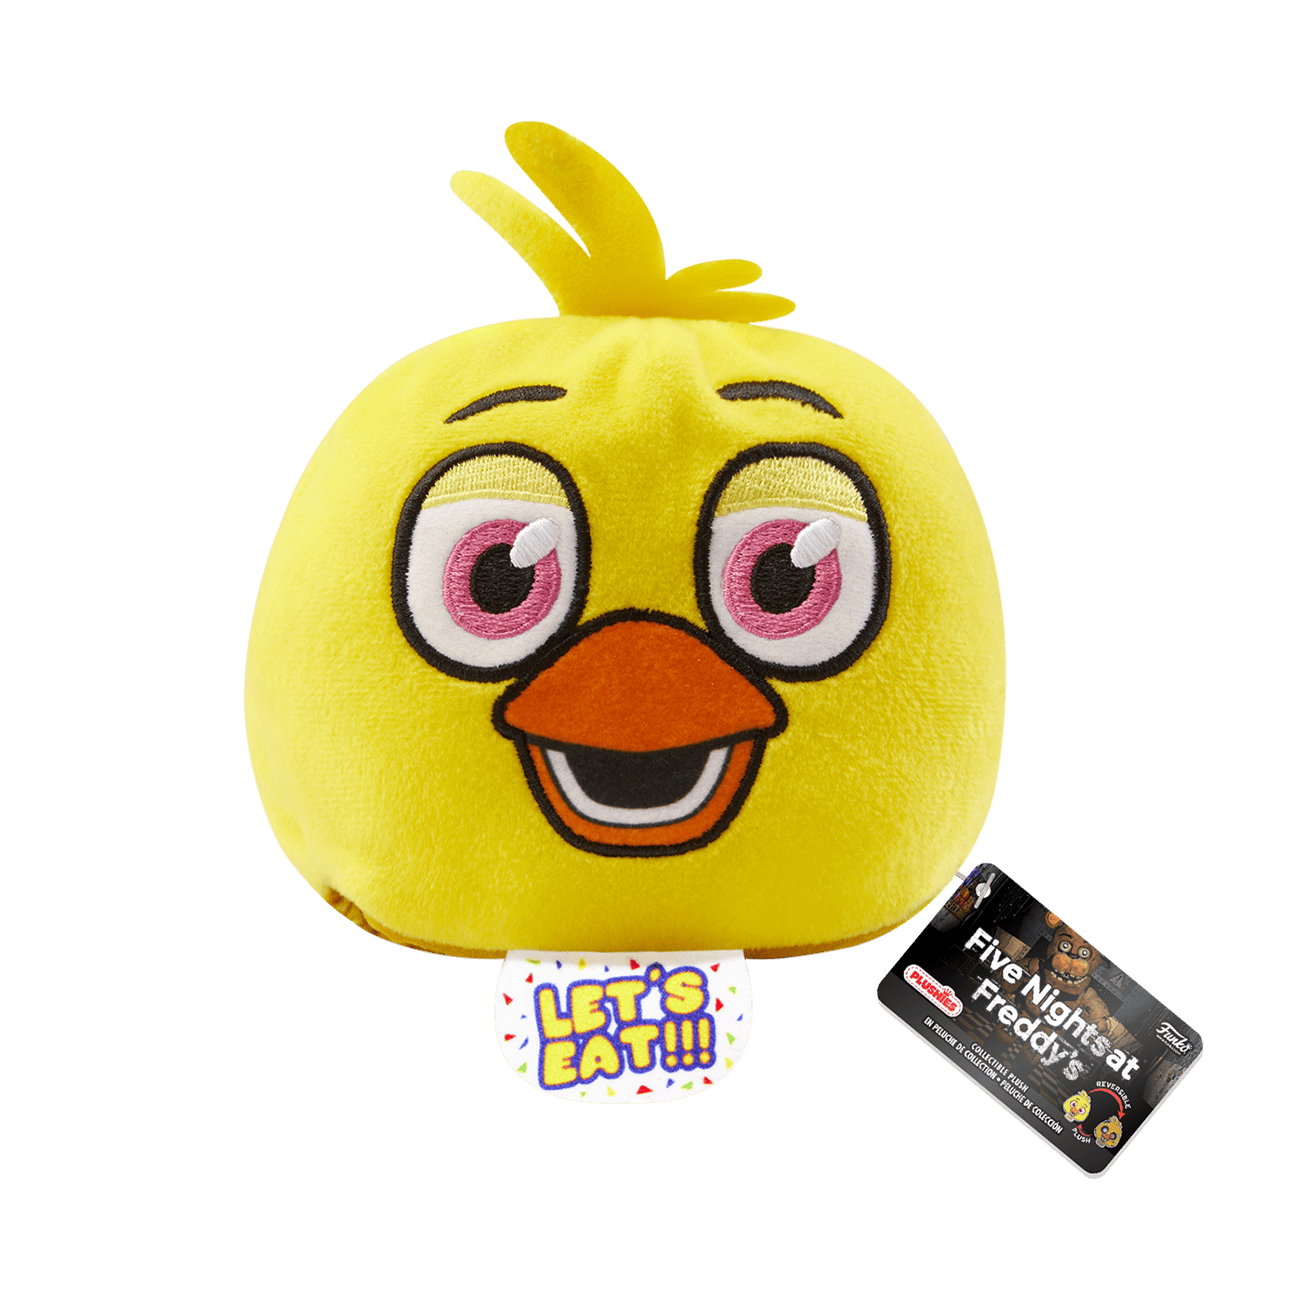 I recently bought this Toy Chica Funko FNaF plush from , and cross  referenced it on Funko's Site and it seems legitimate but what do you guys  think? Is it legitimate or